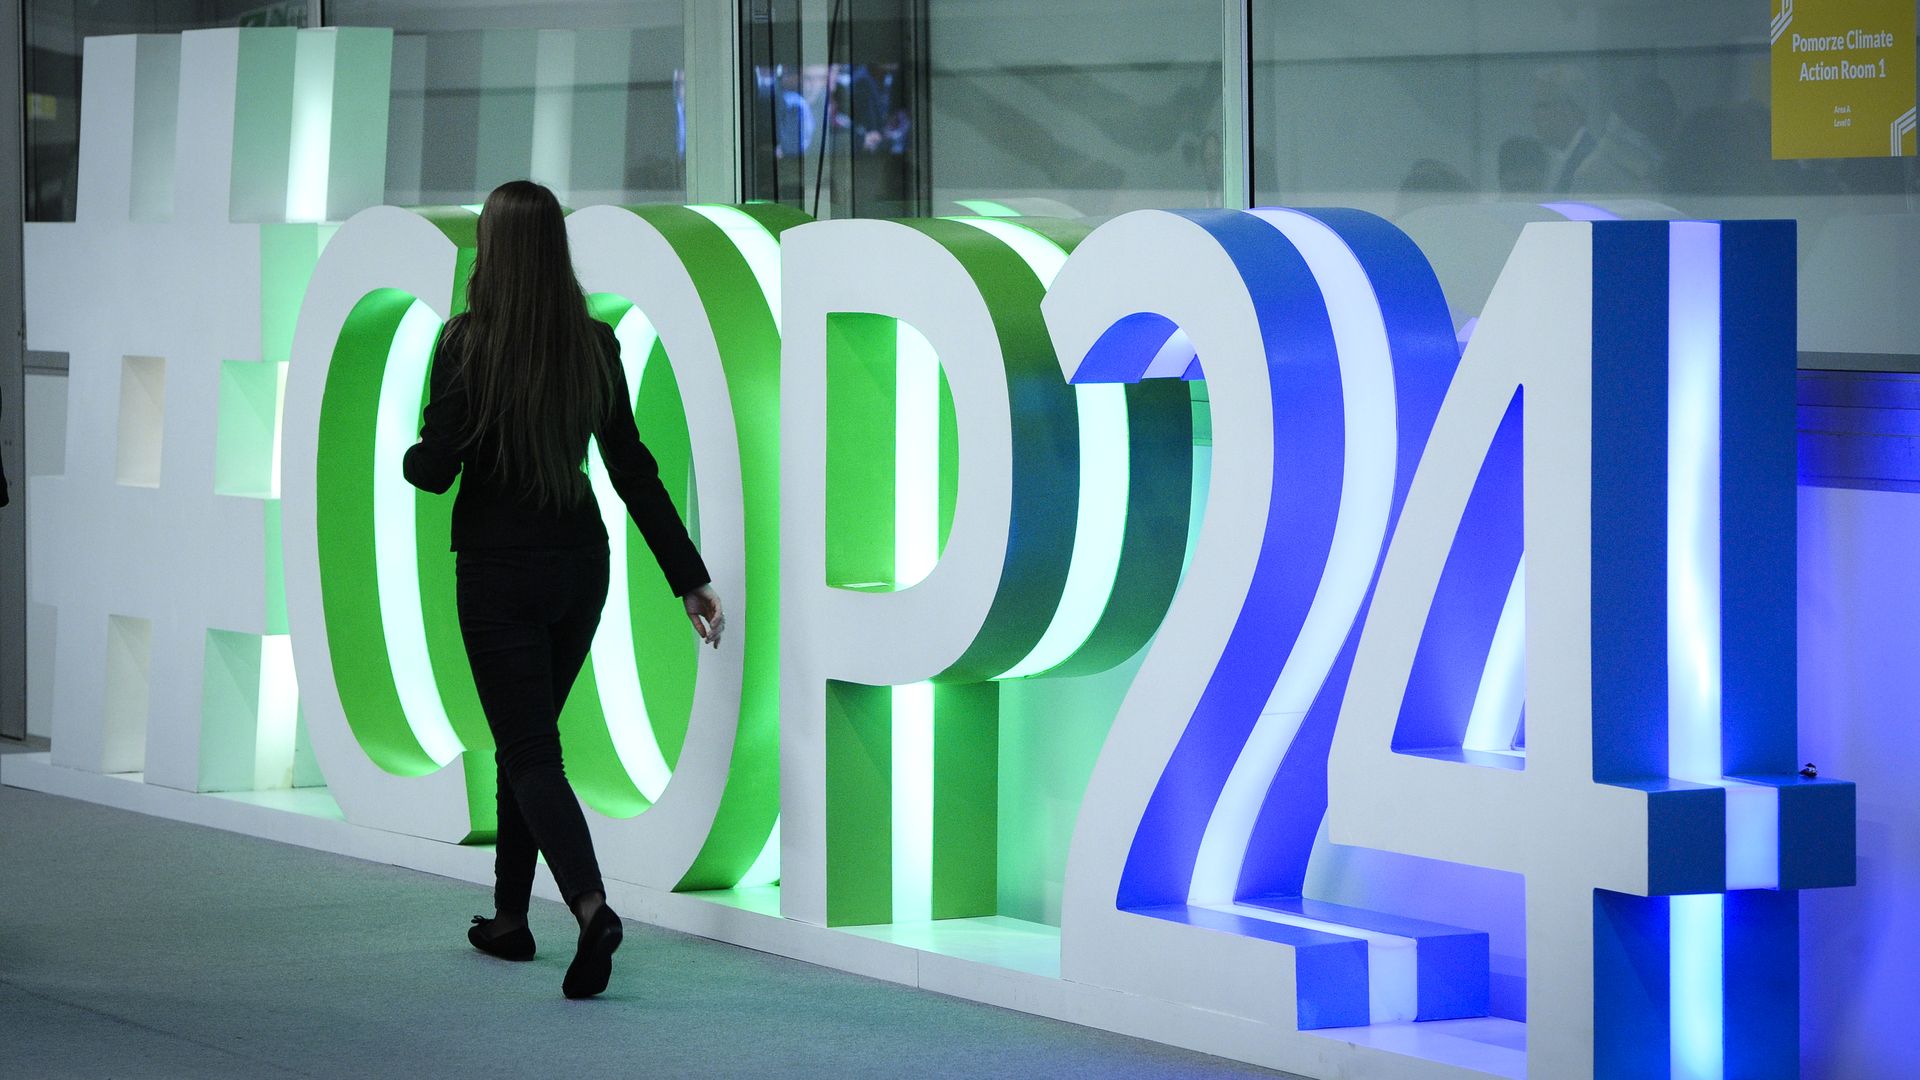 eople are seen walking pas a COP24 logo during the Katowice Climate Conference in Katowice, Poland.